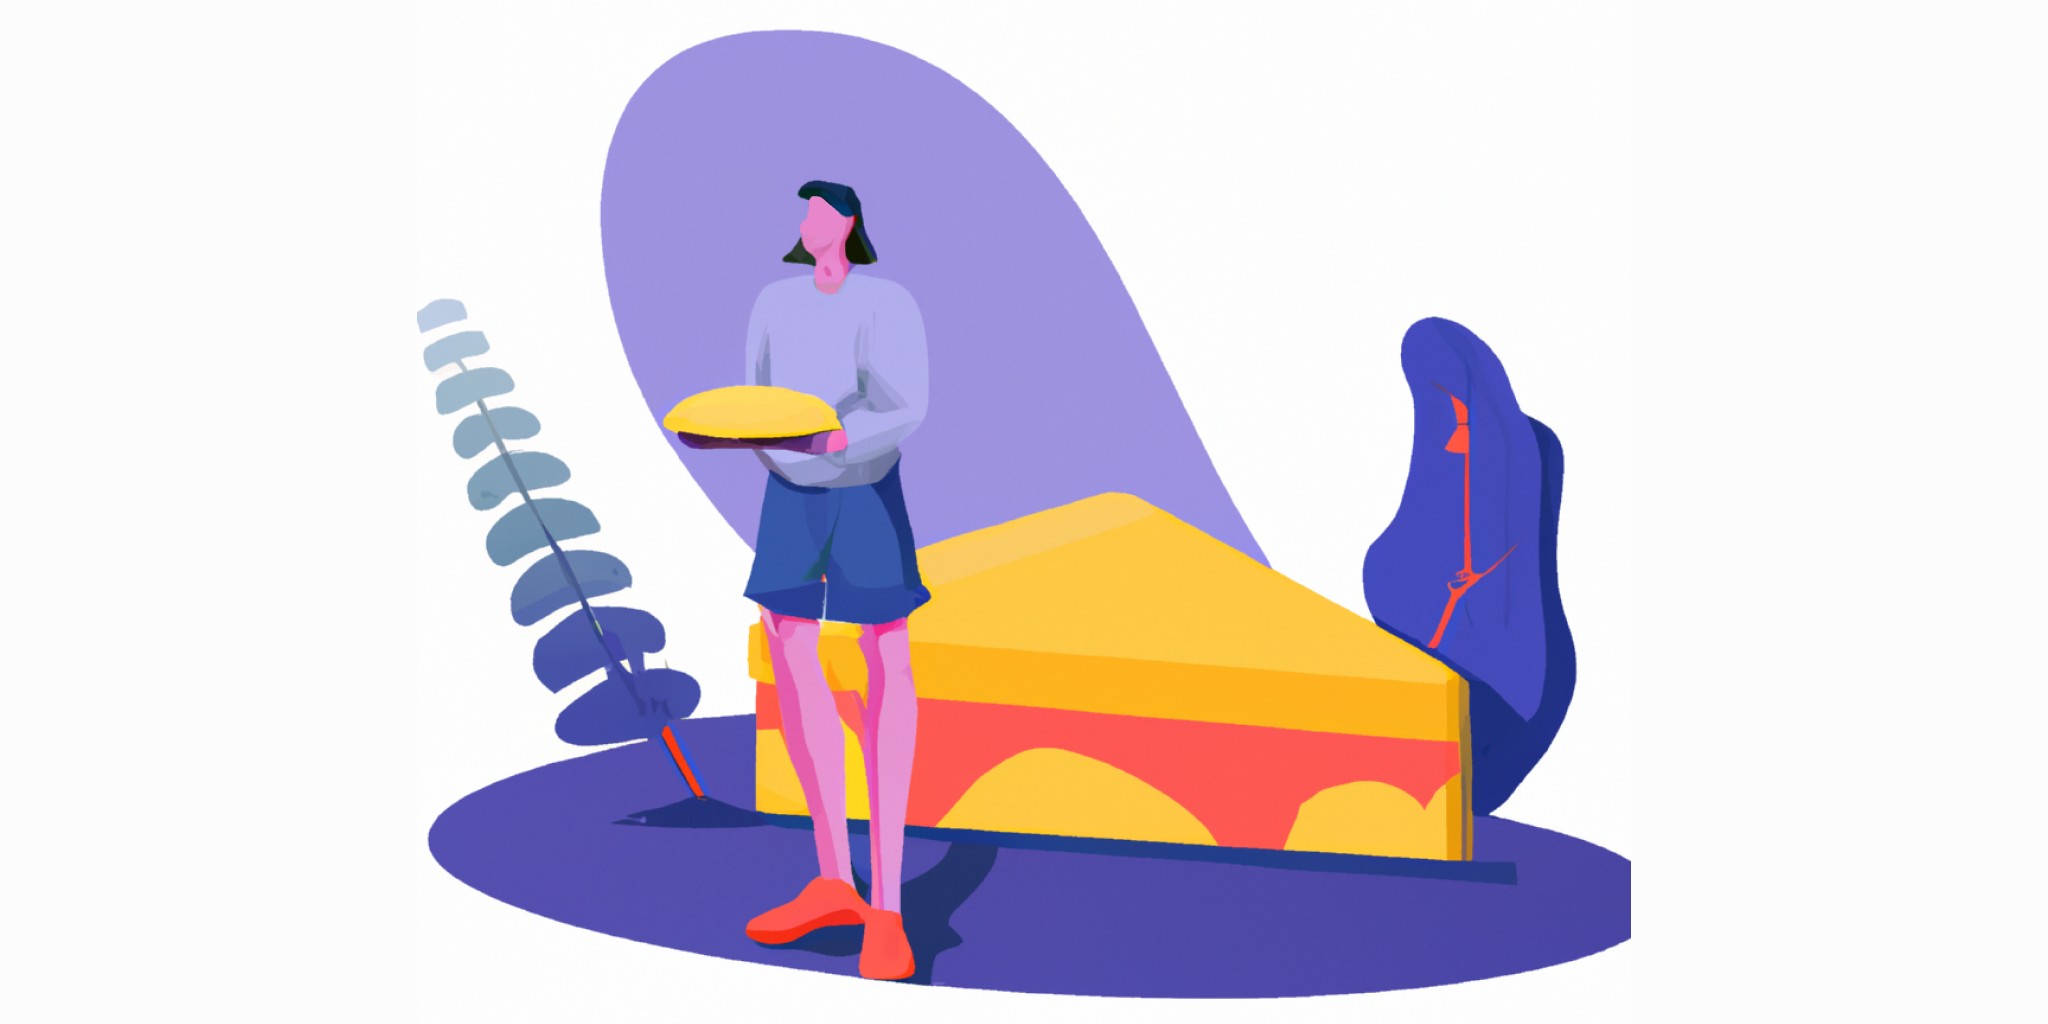 large pie slice with a person next to it in flat illustration style with gradients and white background